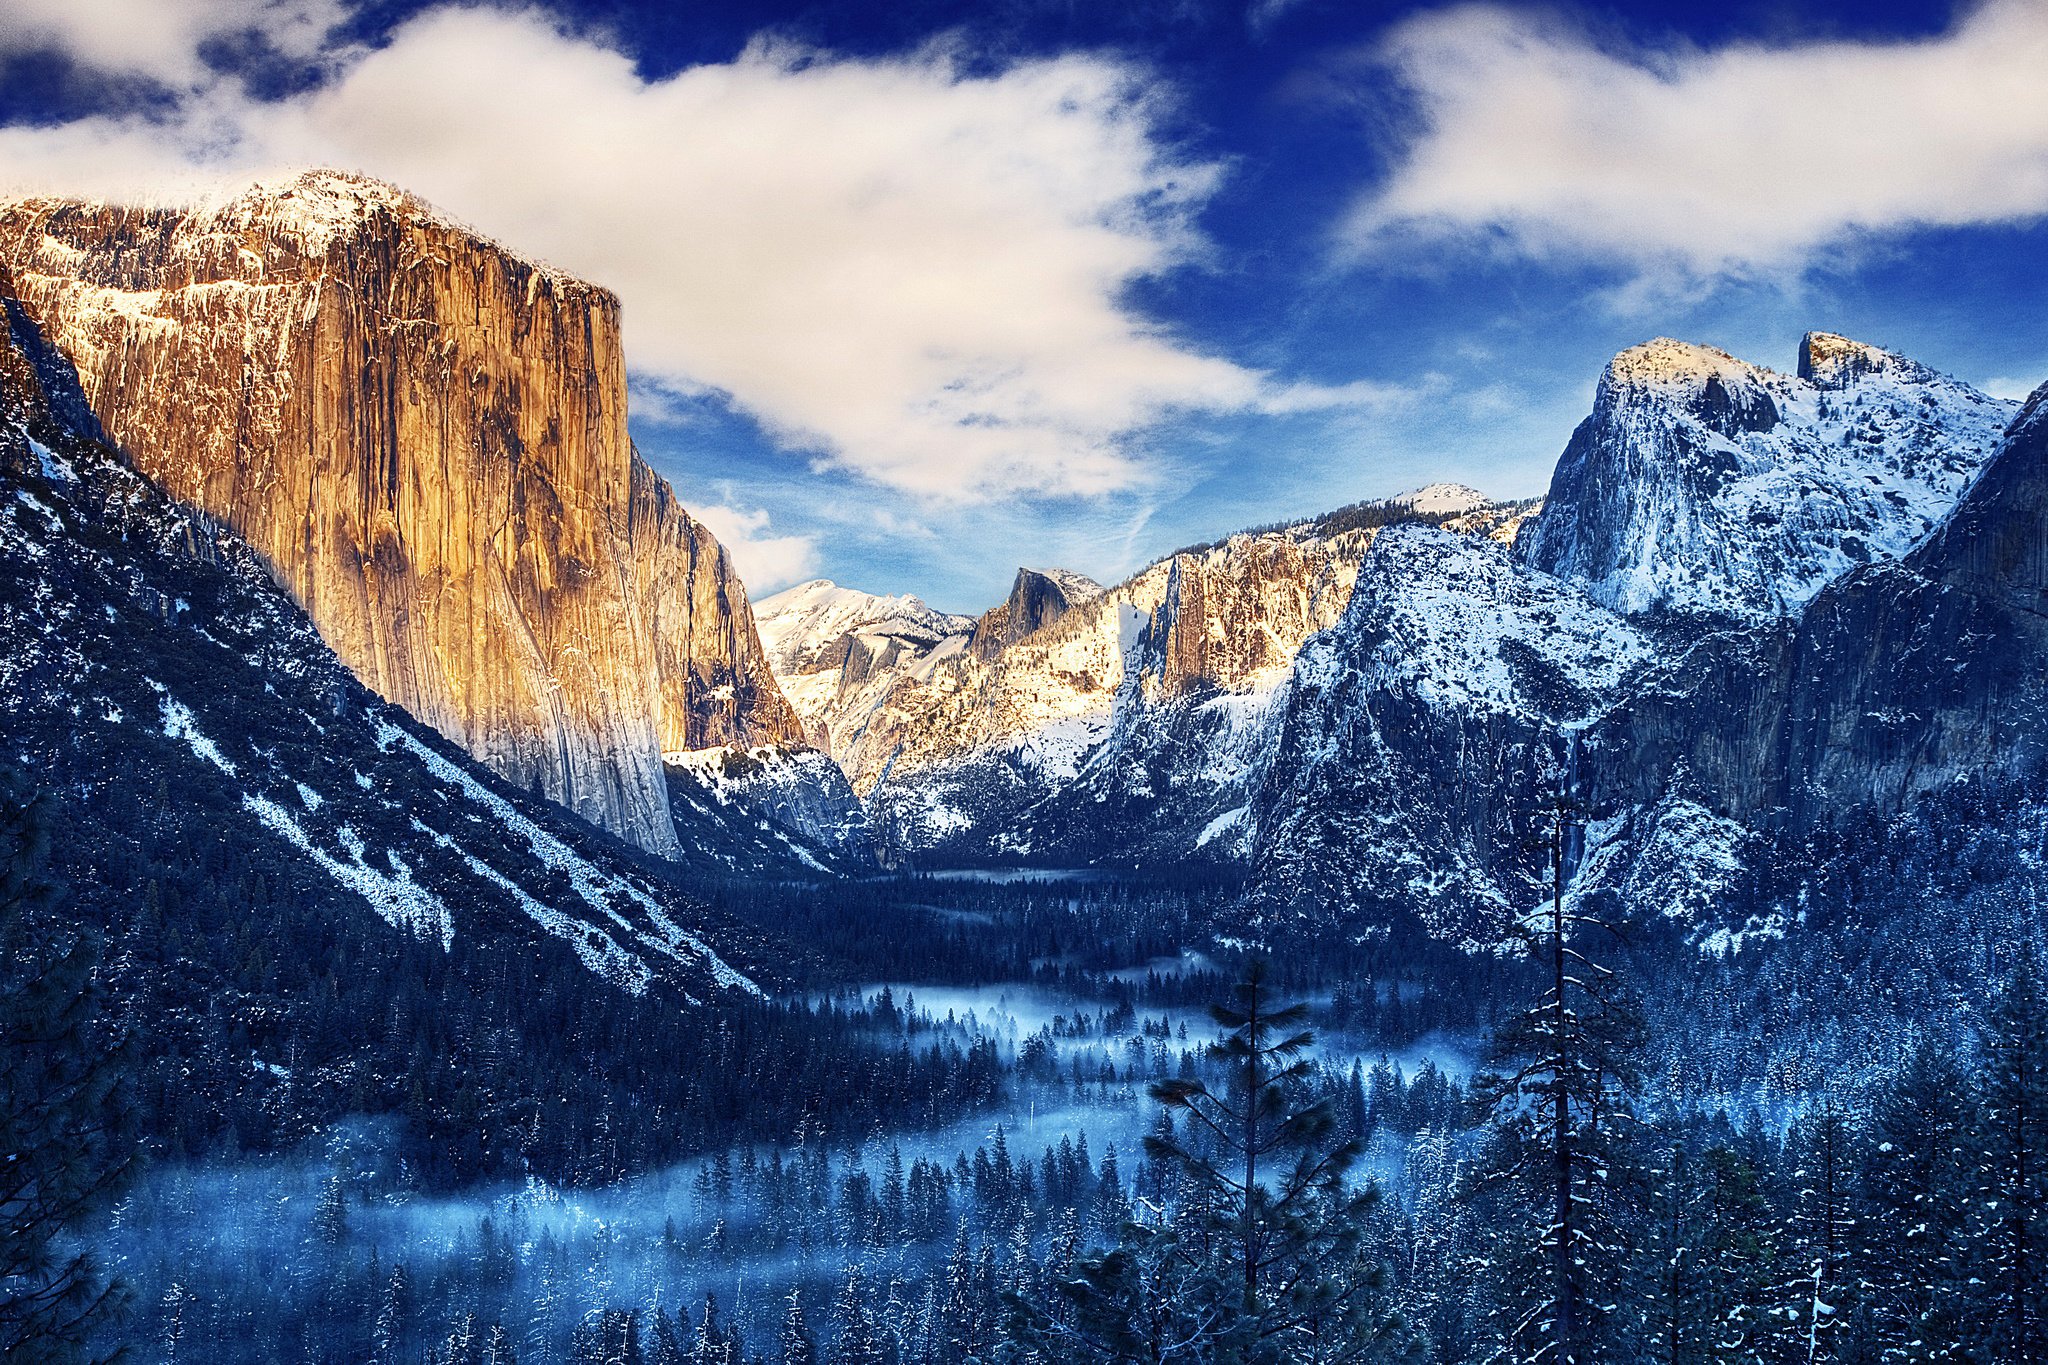 usa, Yosemite, National, Park, Yosemite, National, Park, California, Winter, Snow, Mountain, Rock, Valley, Forest, Trees, Fog, Clouds Wallpaper